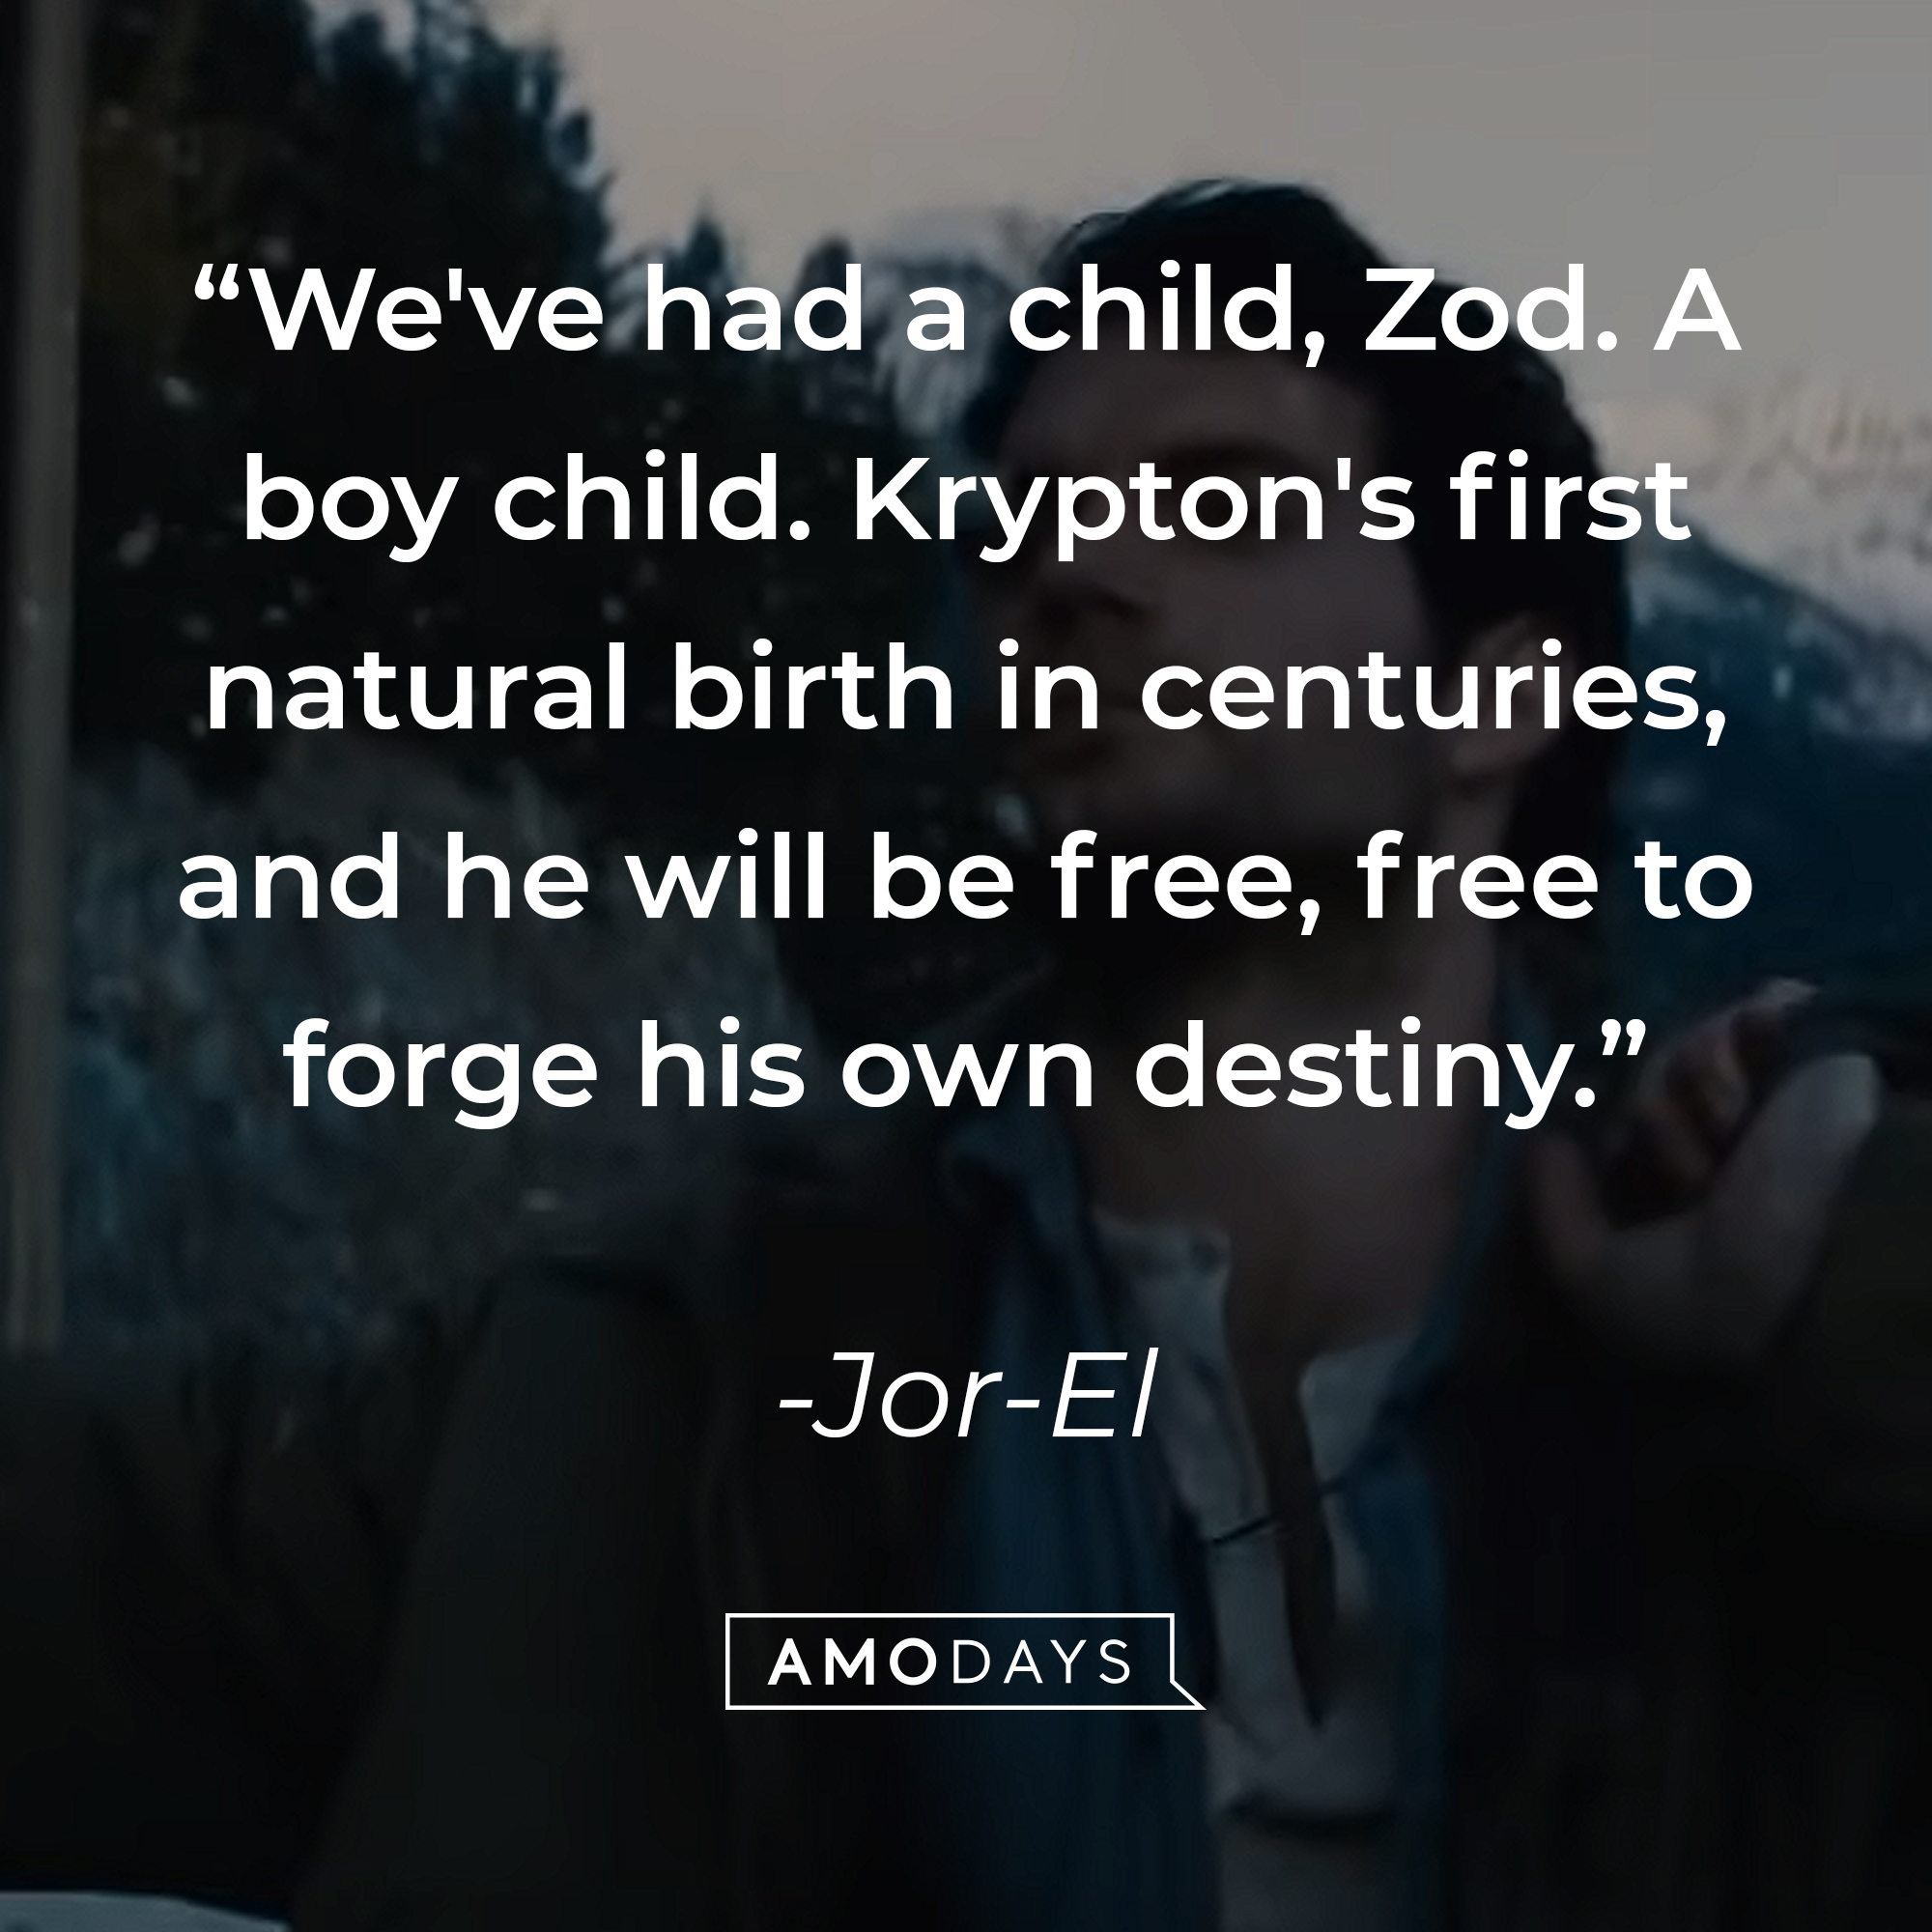 Jor-El's quote: "We've had a child, Zod. A boy child. Krypton's first natural birth in centuries, and he will be free, free to forge his own destiny." | Source: Youtube.com/WarnerBrosPictures